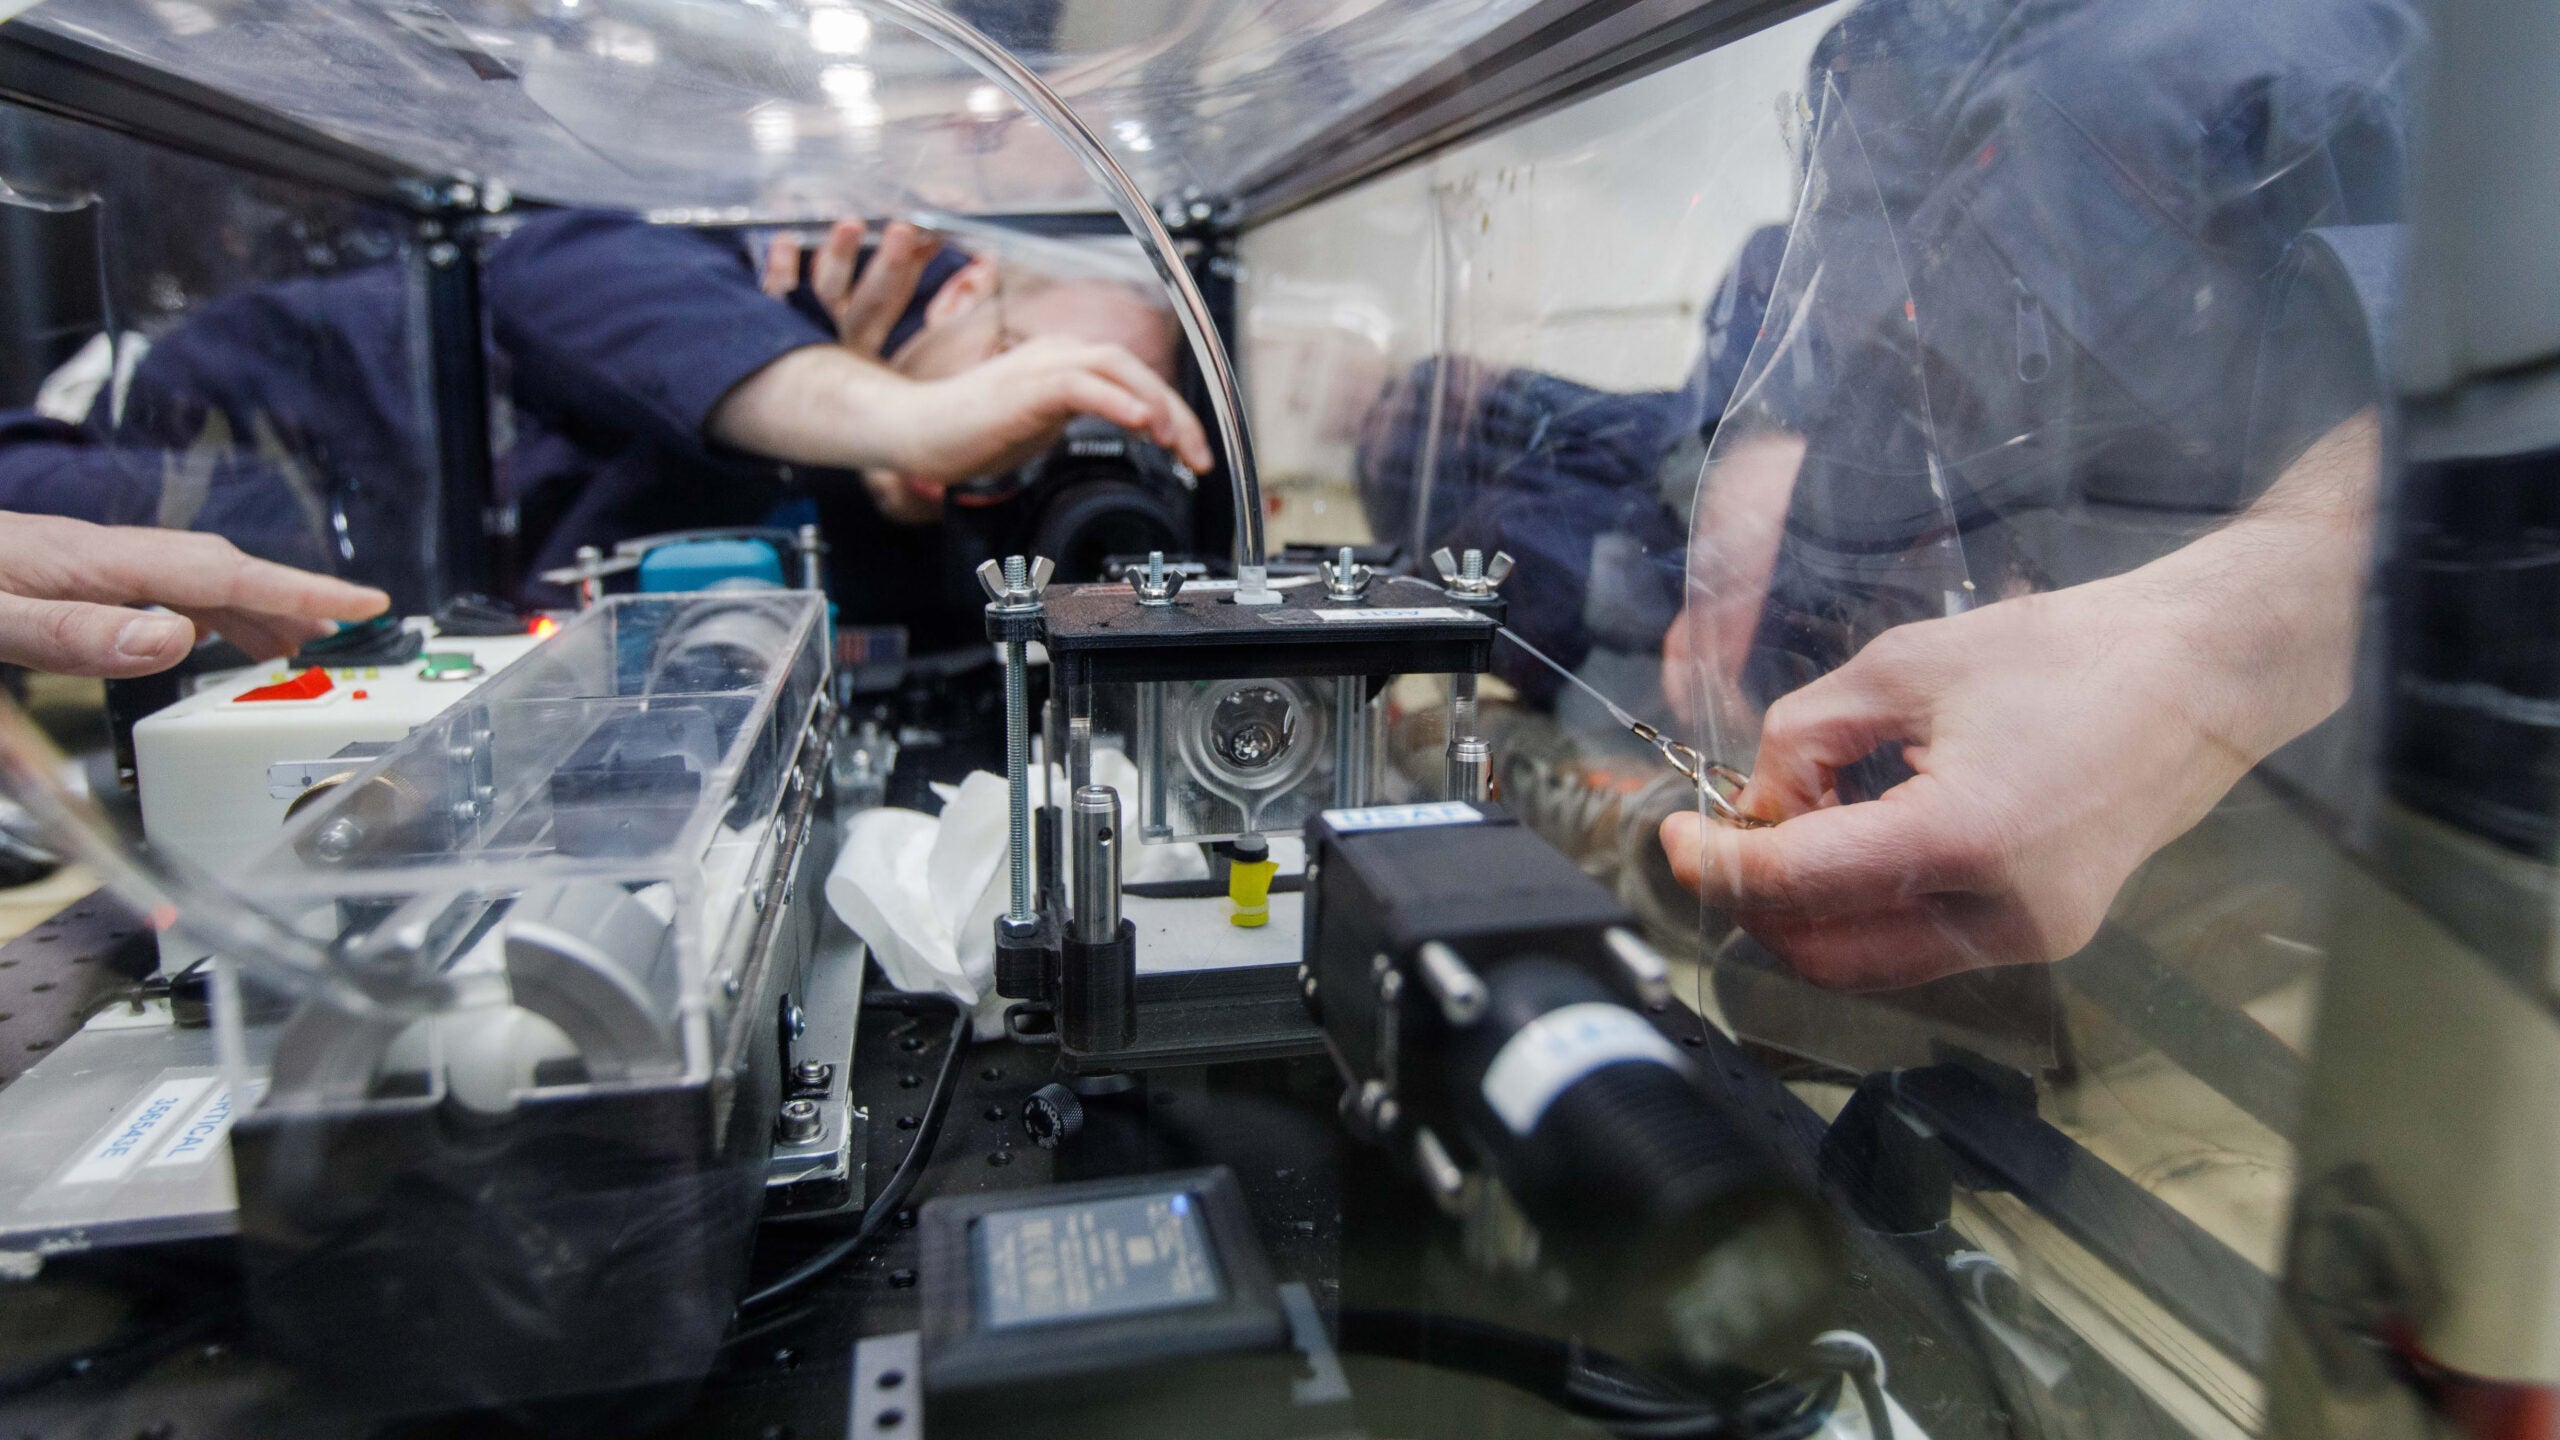 FLUTE researchers capture data while they push synthetic oil into a circular frame (about the size of a dollar coin), momentarily forming a liquid lens during a 15 to 20-second period of microgravity on a ZeroG parabolic flight.